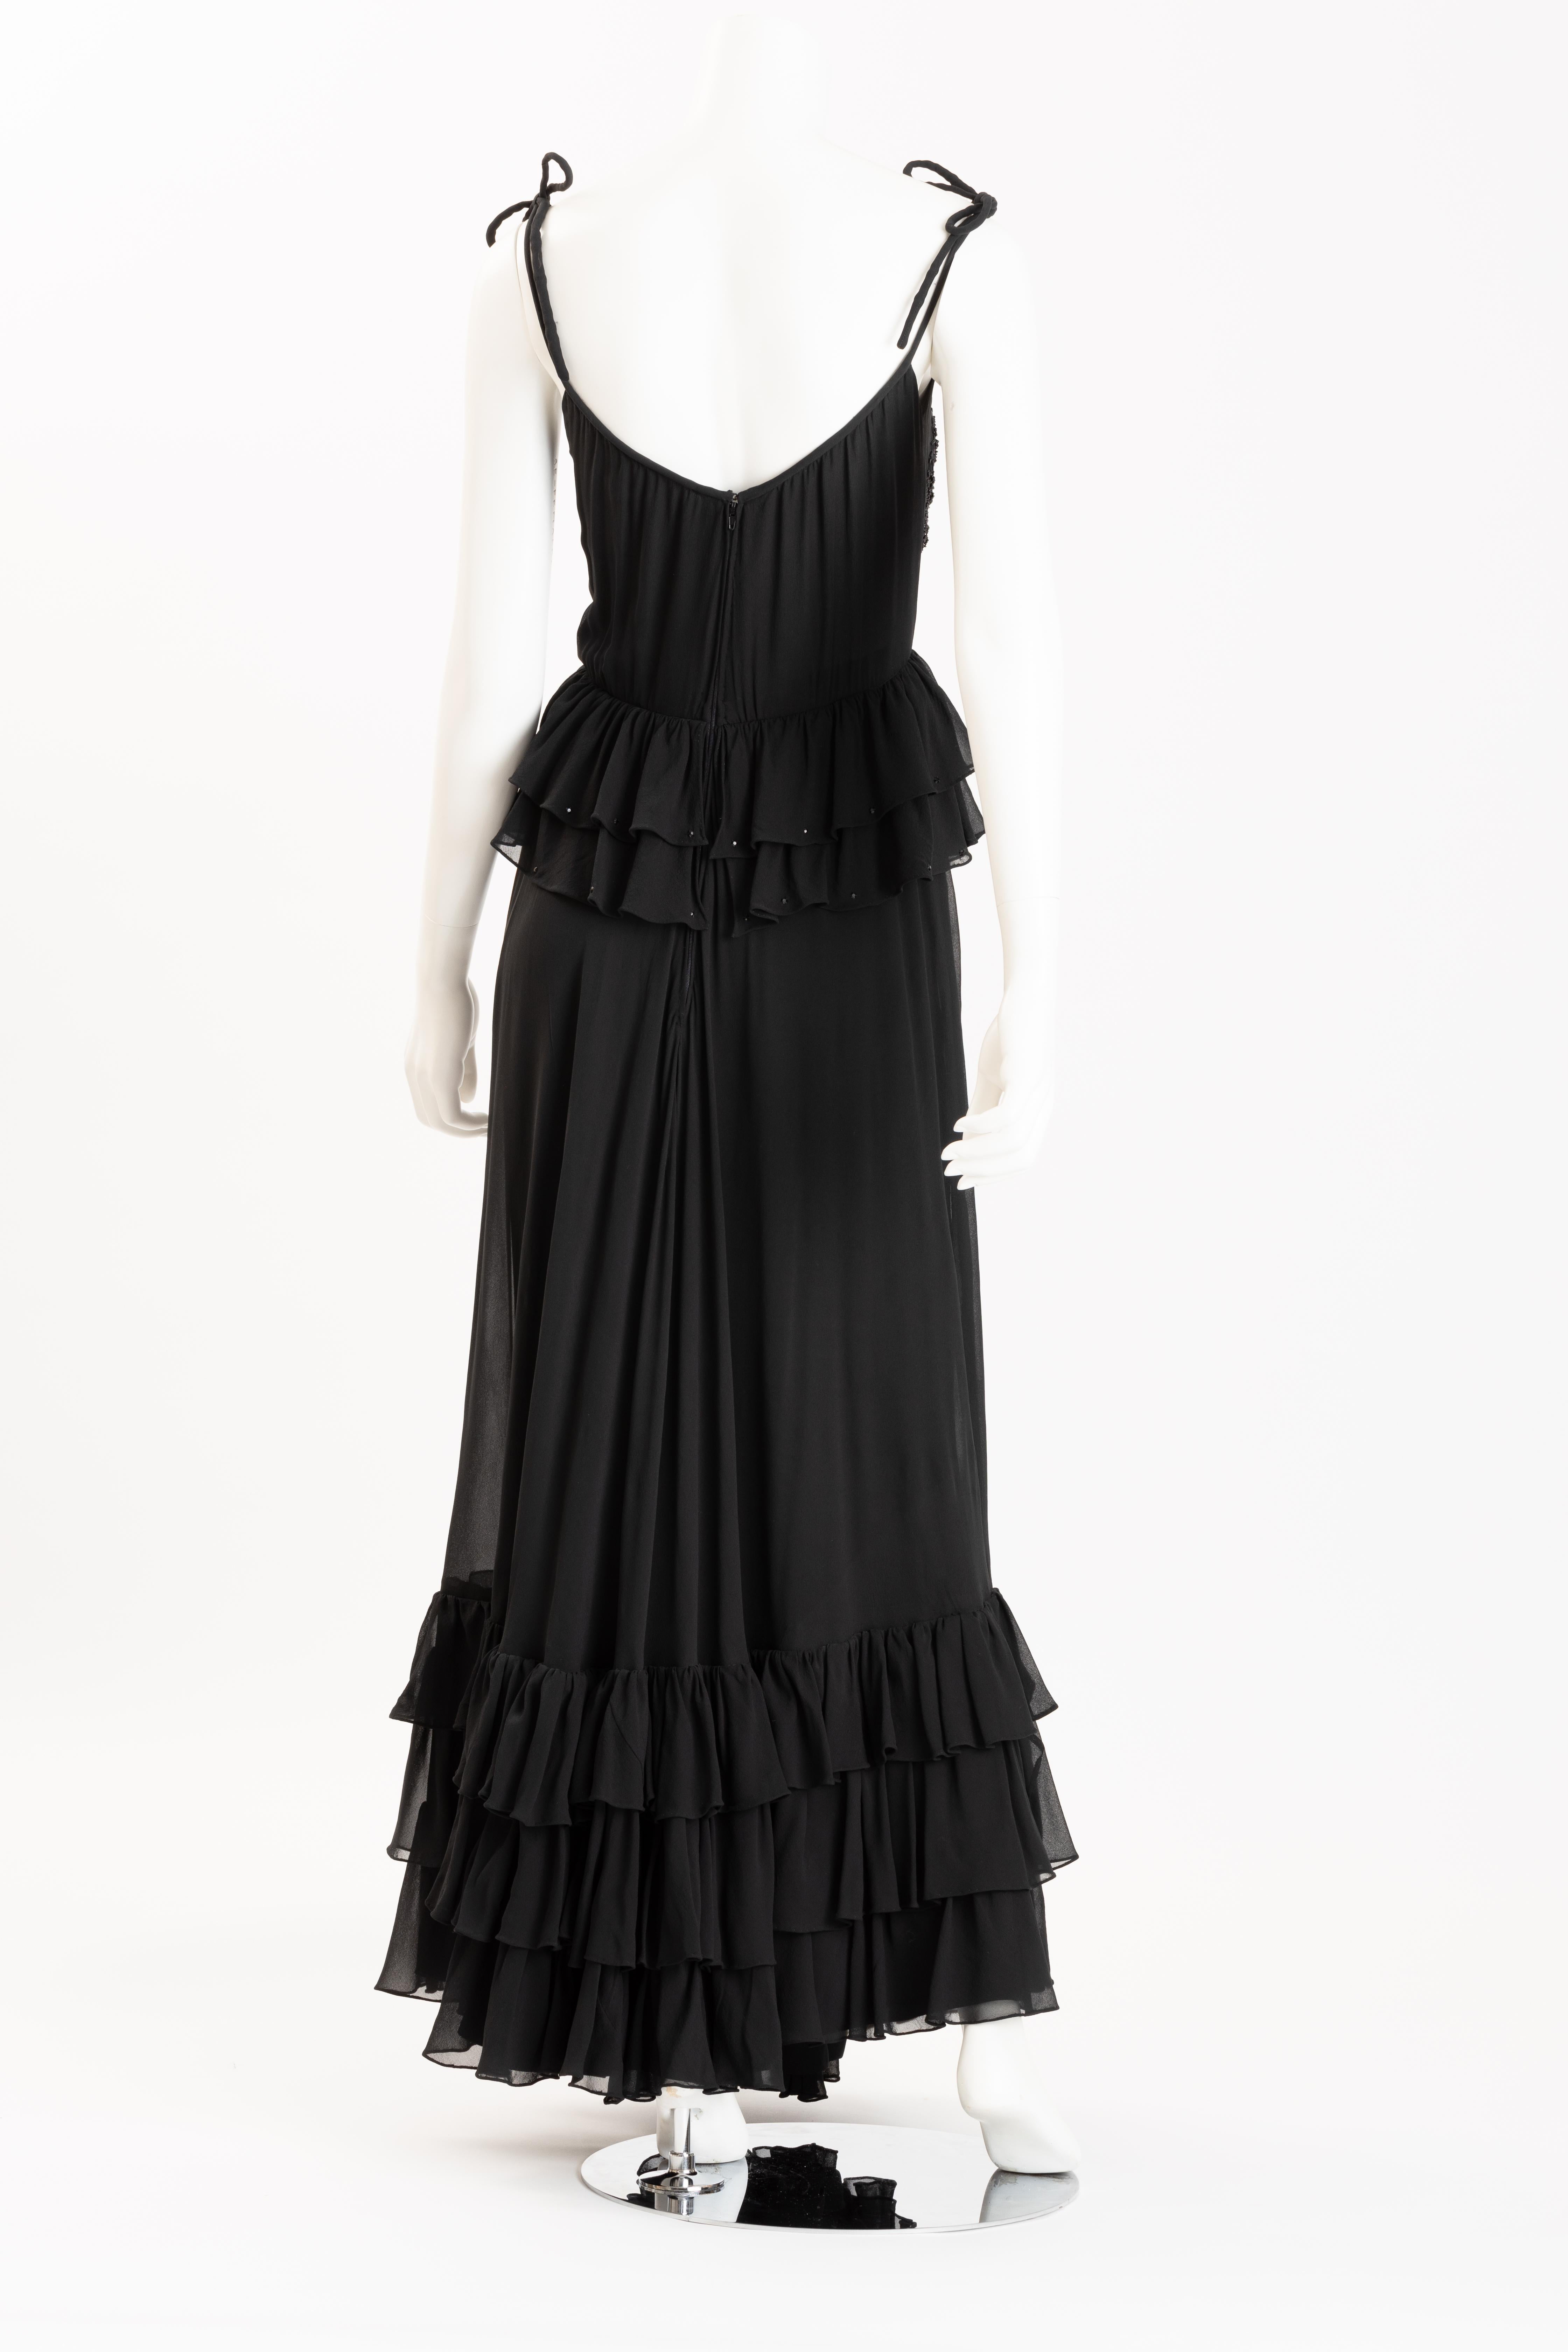 Luxurious Valentino Boutique black silk evening gown with tiered ruffles, sweeping hemline and hand beaded and embroidered bodice. Two ruffles at bodice are hand beaded with tiny jet palletes.
Gown features hand rolled silk ties at shoulders, and